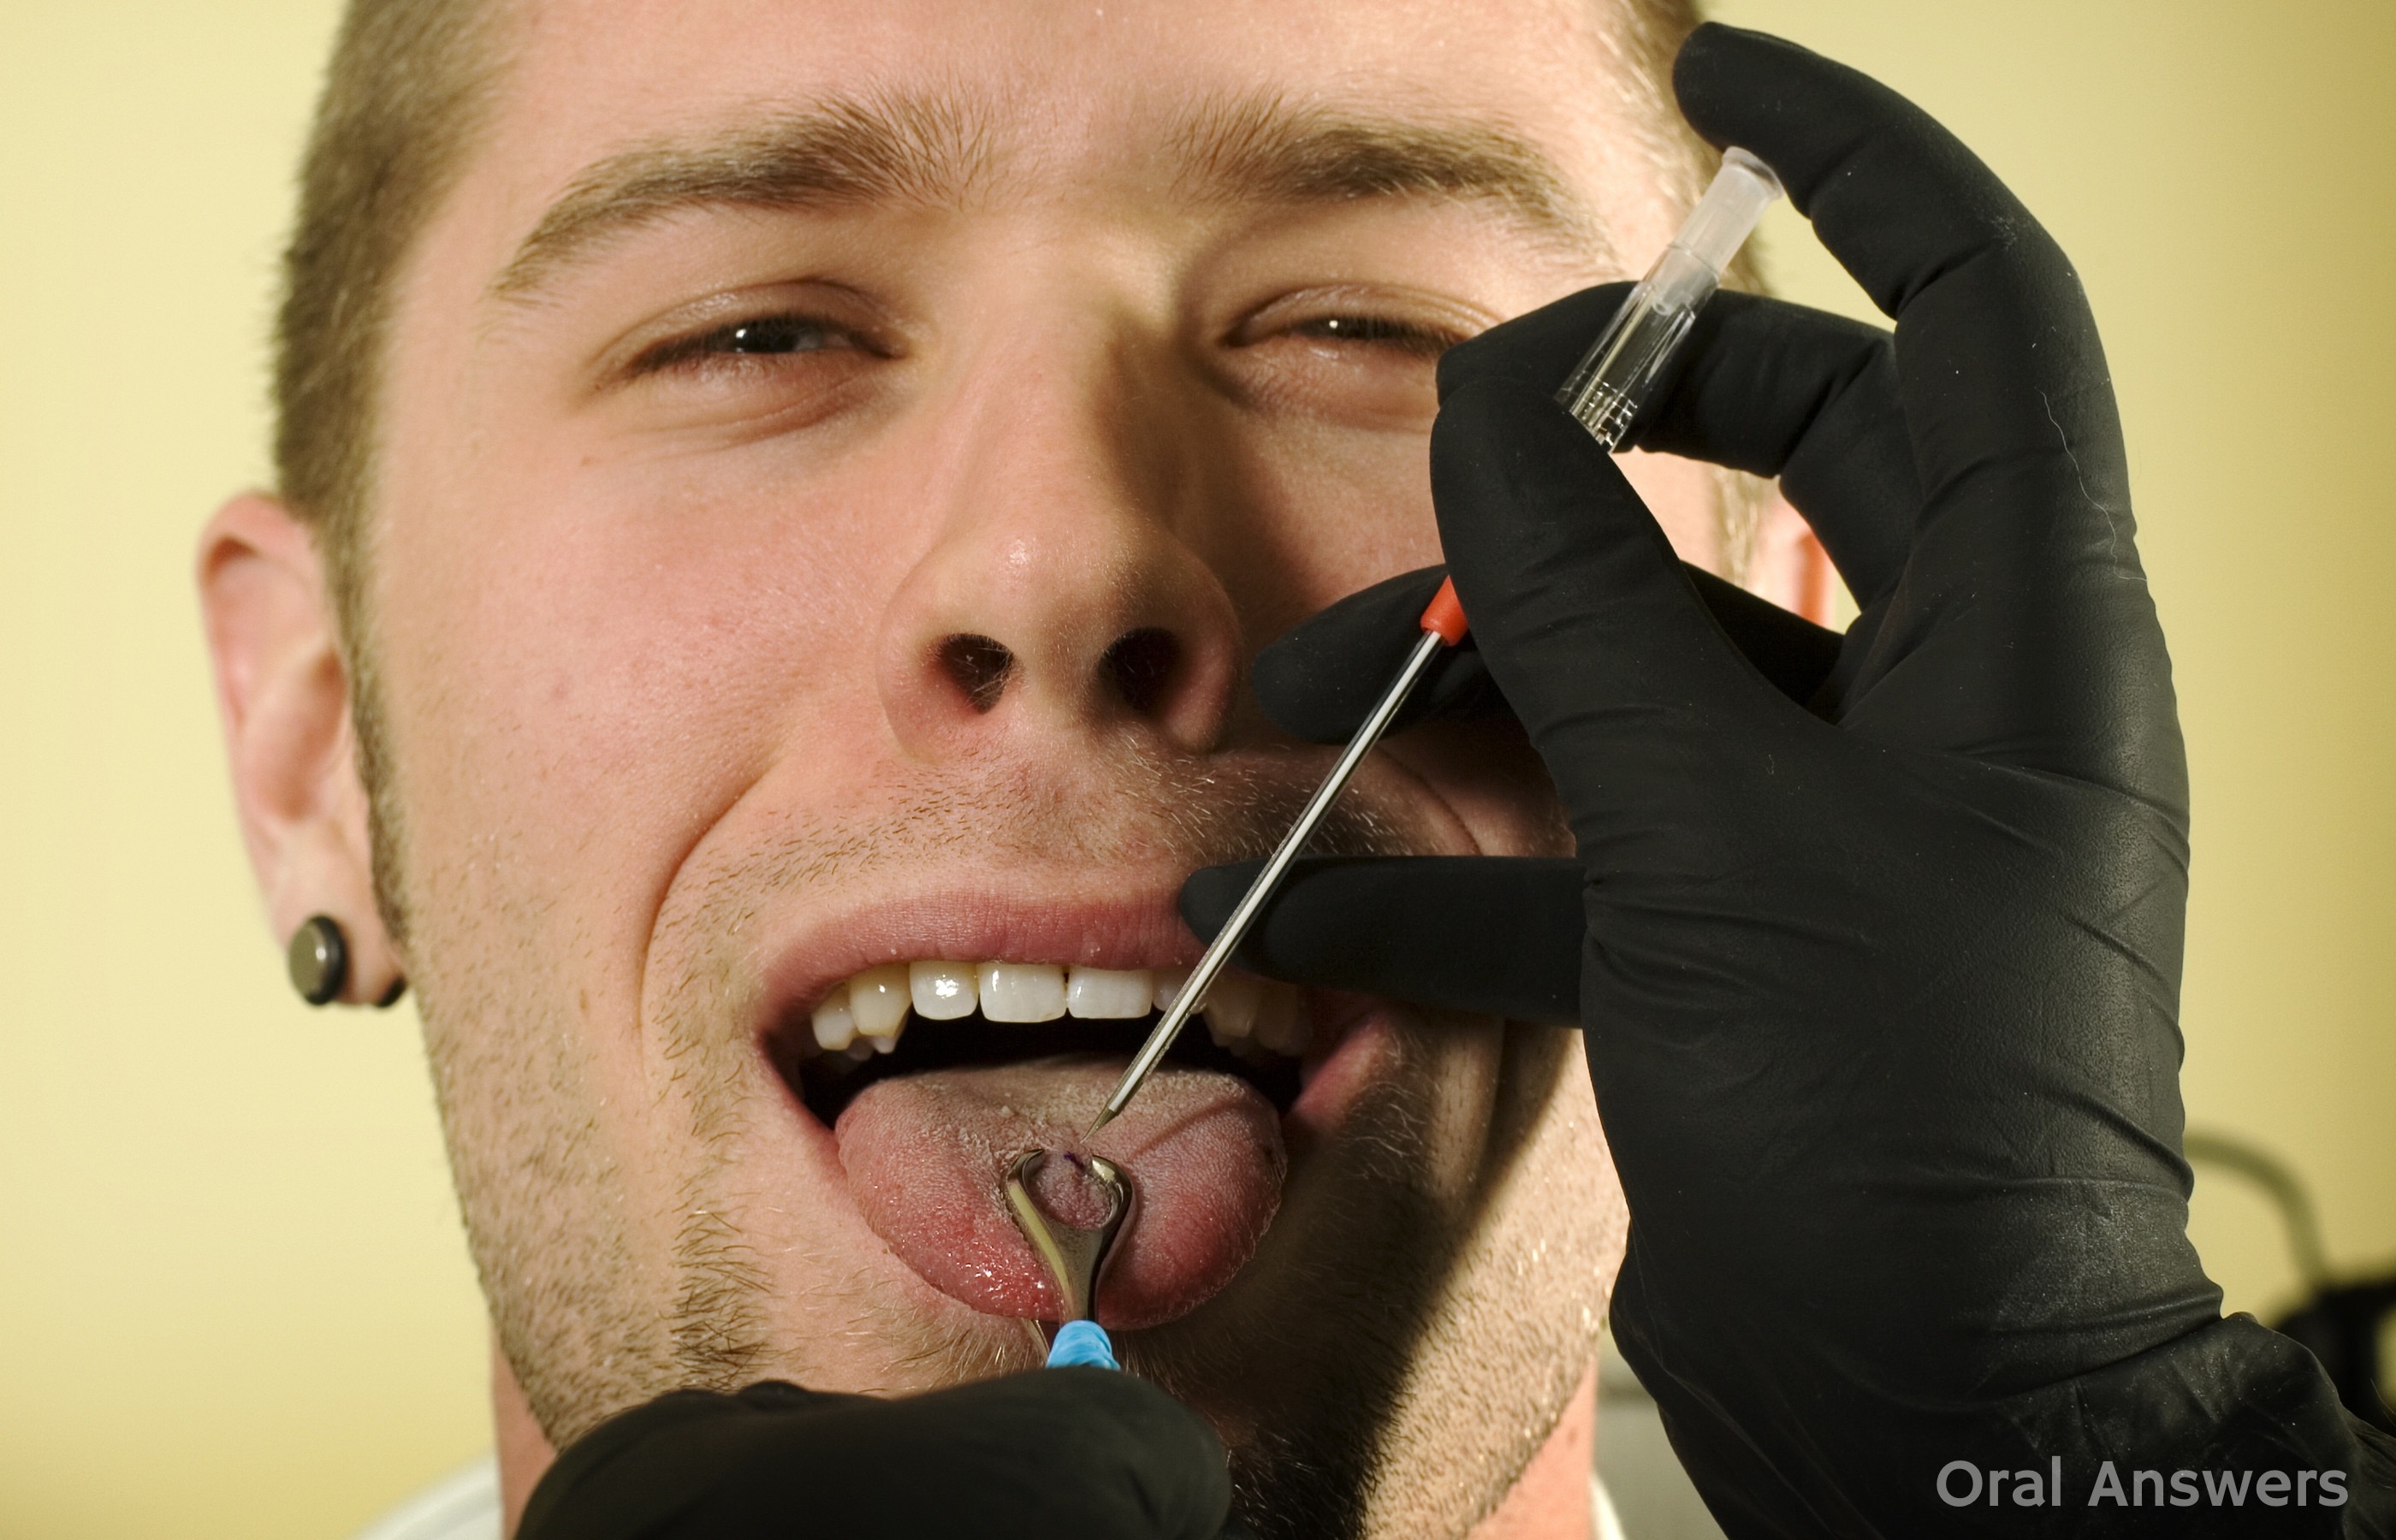 Tongue Piercing Procedure How A Tongue Gets Pierced Oral Answers